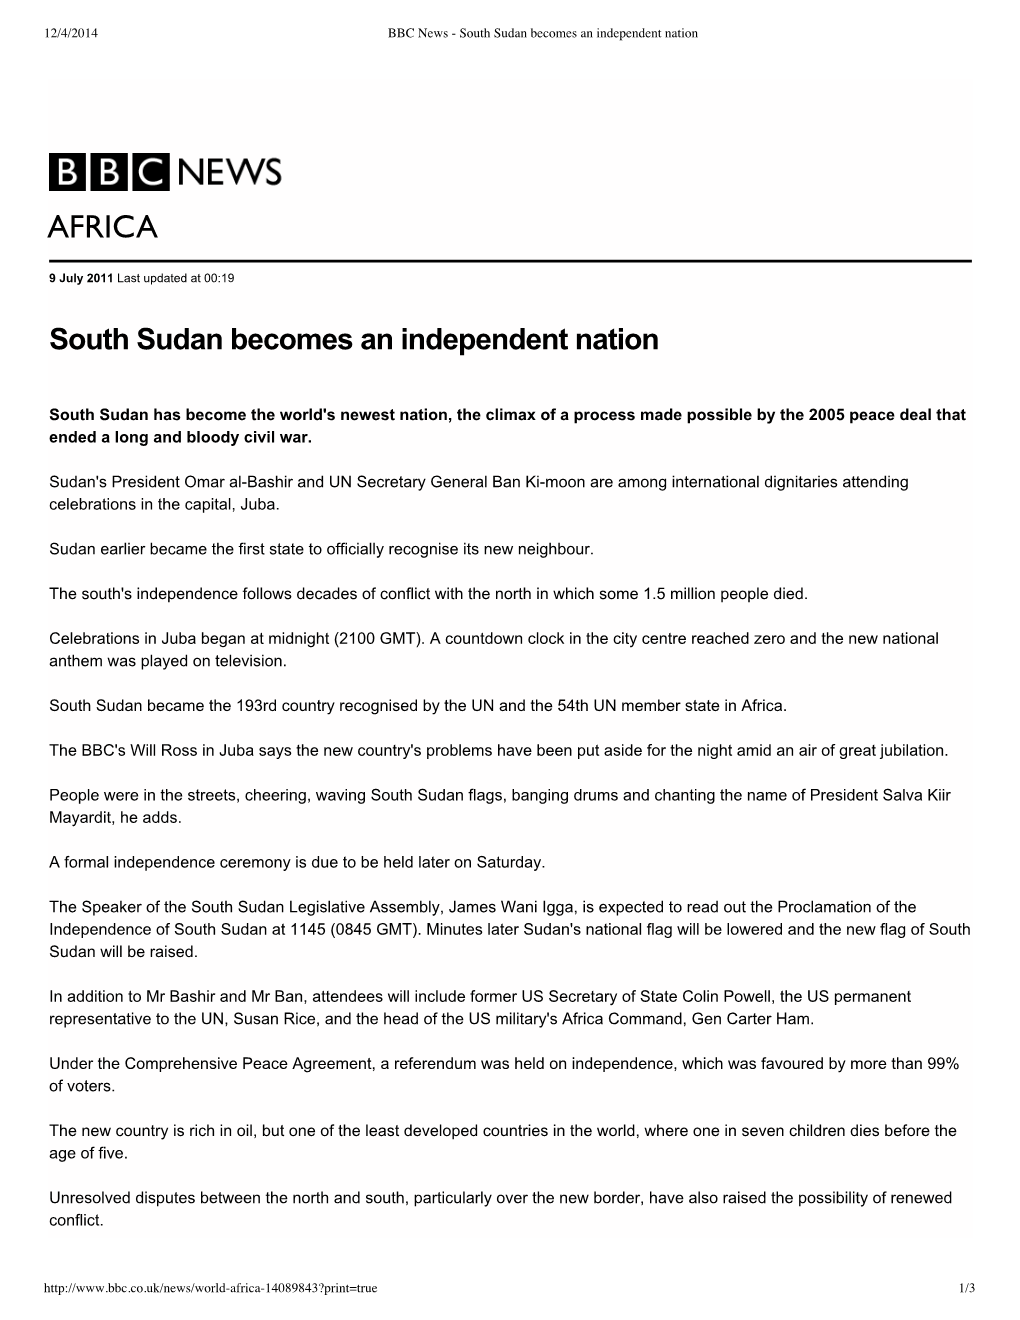 South Sudan Becomes an Independent Nation